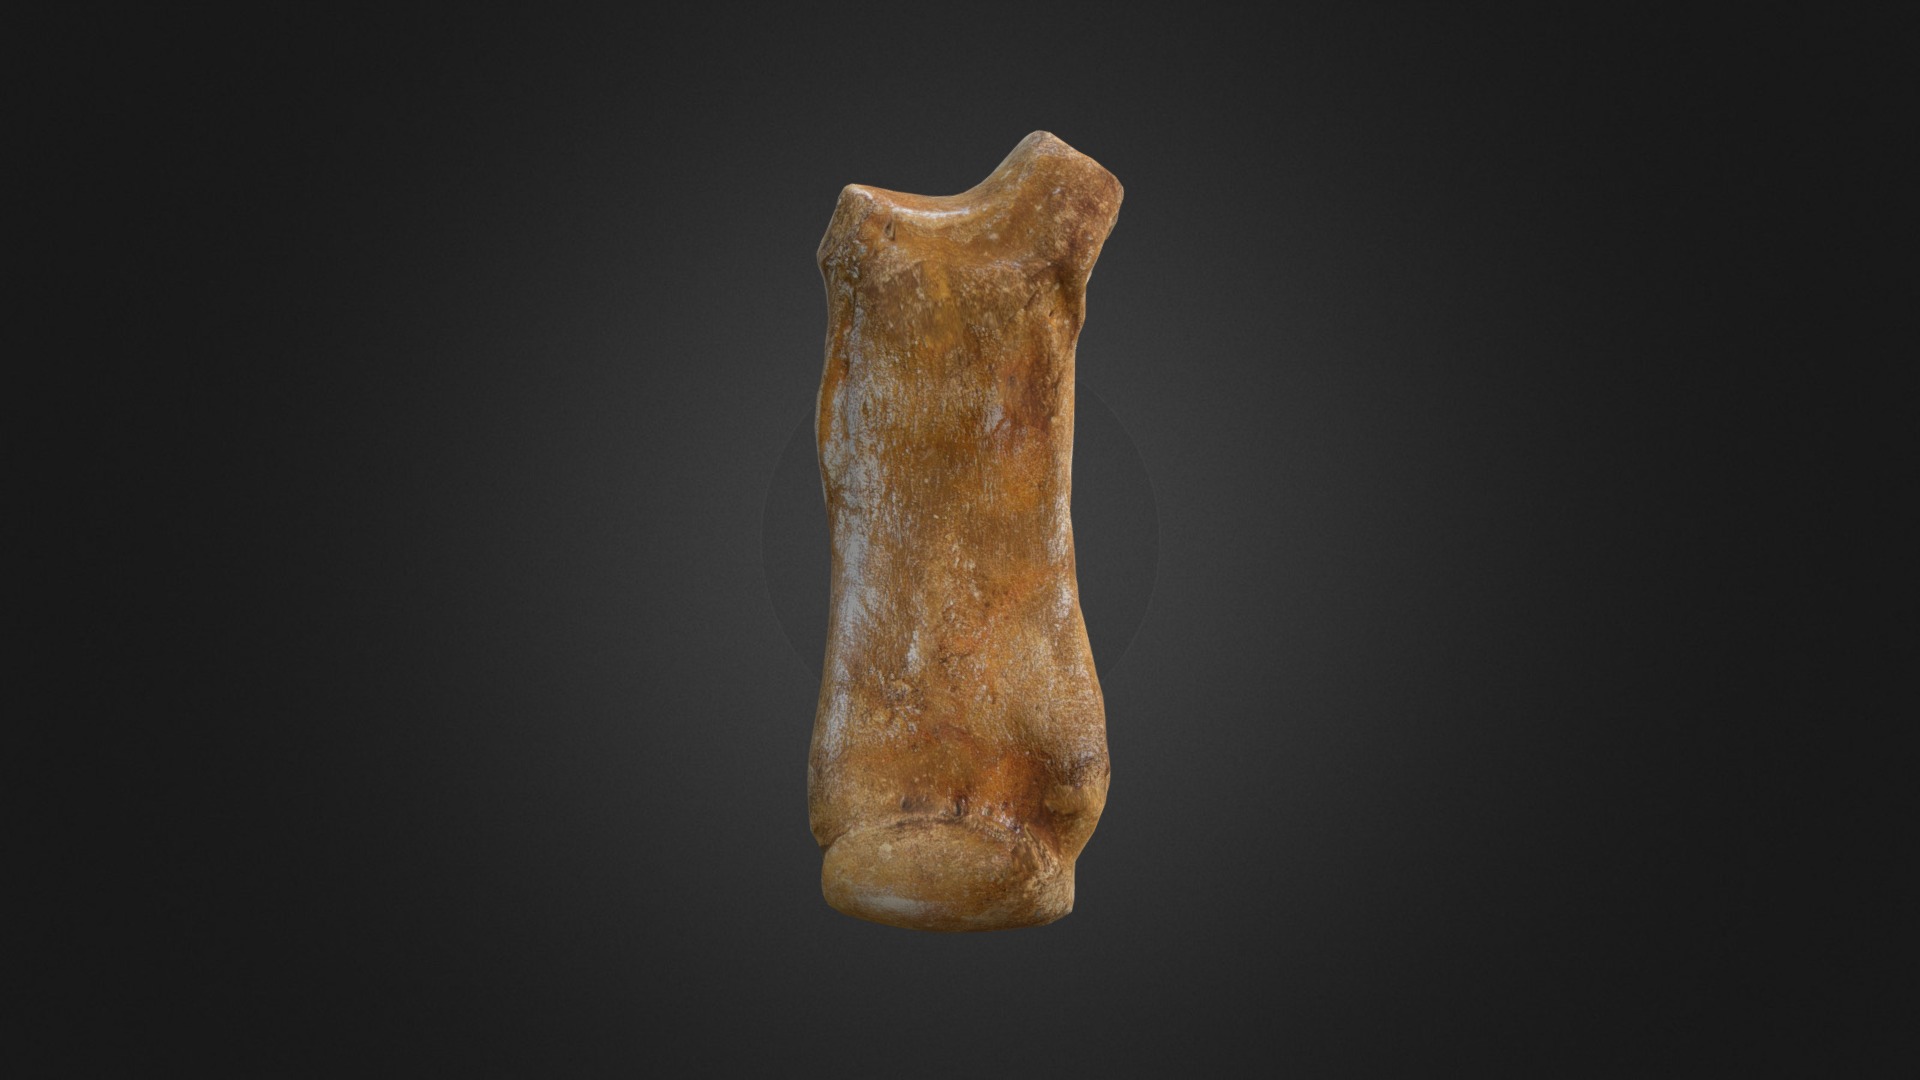 3D model Woolly Rhino Metacarpal 3rd - This is a 3D model of the Woolly Rhino Metacarpal 3rd. The 3D model is about a close-up of a stone.